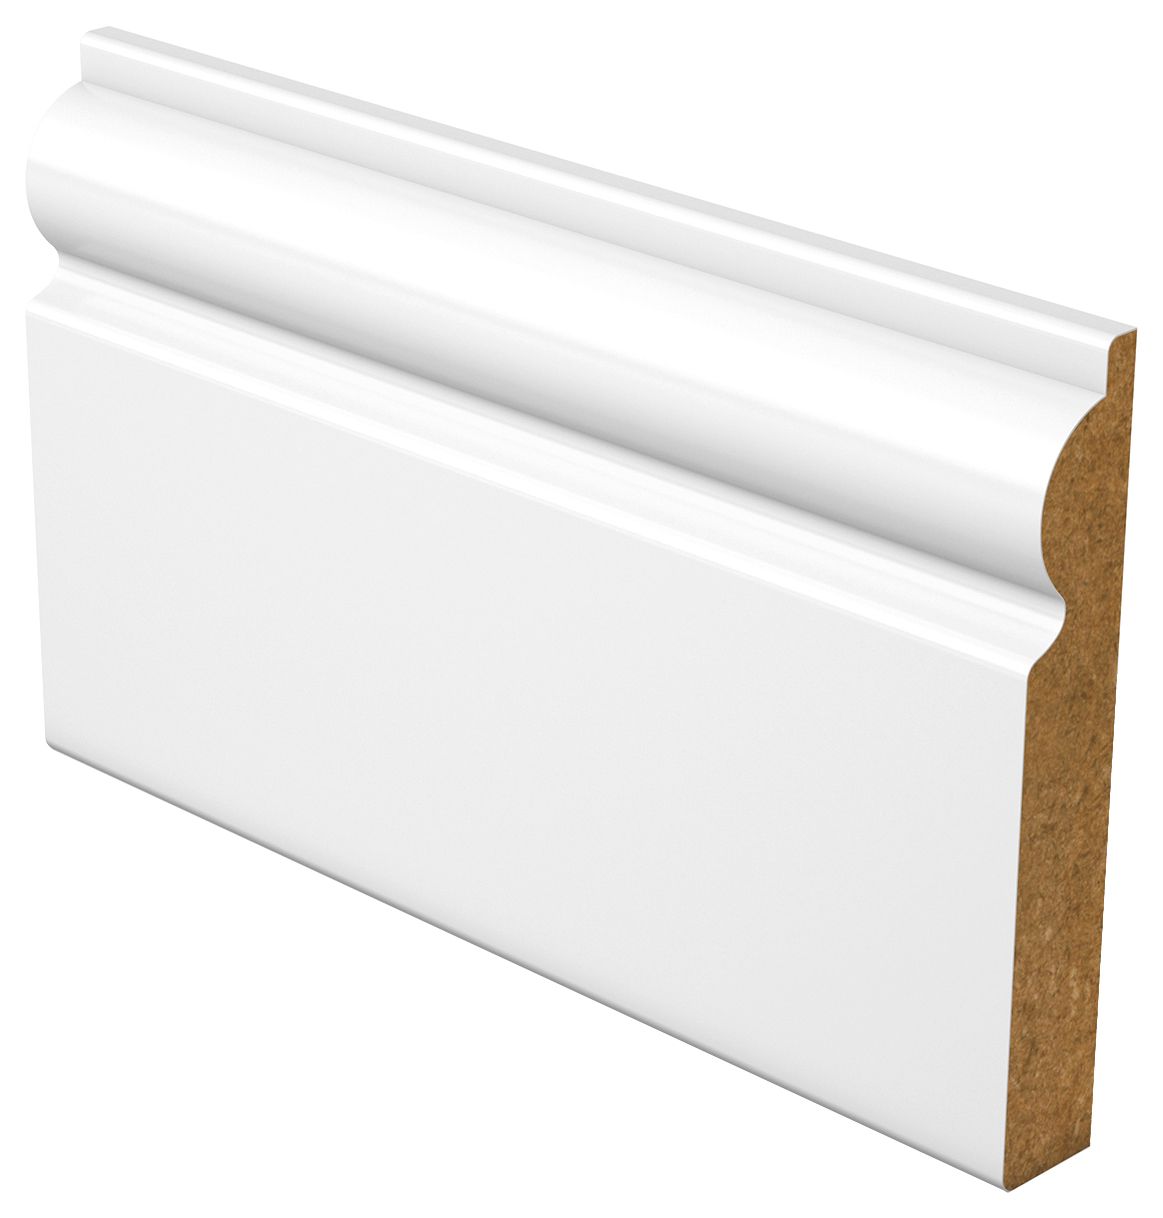 Wickes Torus Fully Finished Satin White Skirting - 18 x 144 x 4200mm